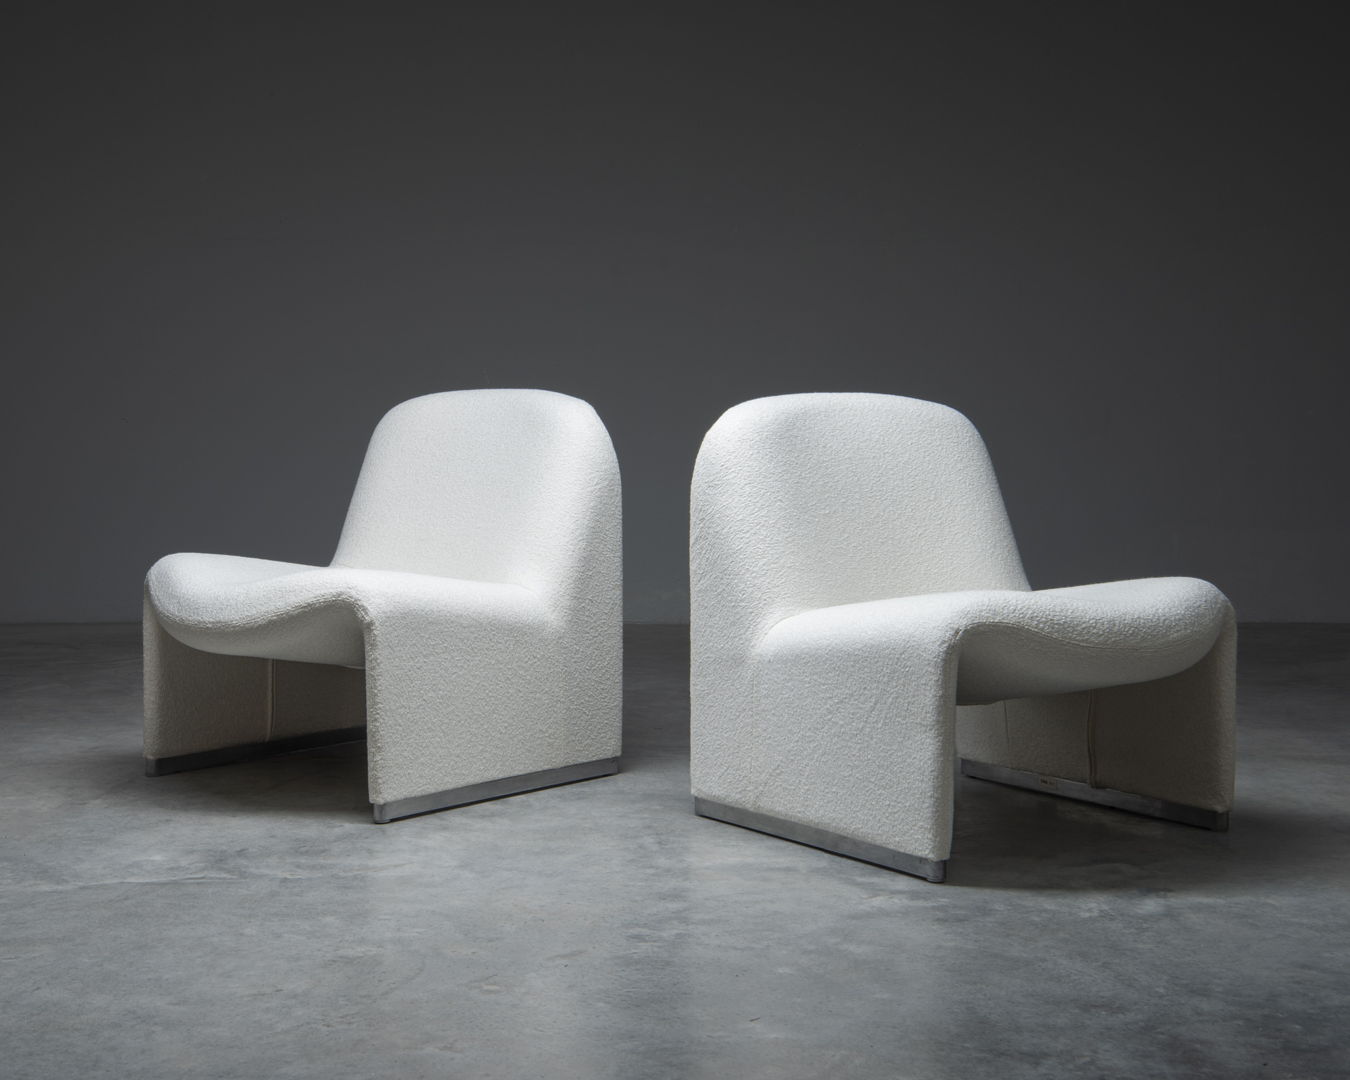 A pair of 'Alky' easy chairs, designed in the 1970s by Giancarlo Piretti for Castelli, Italy.